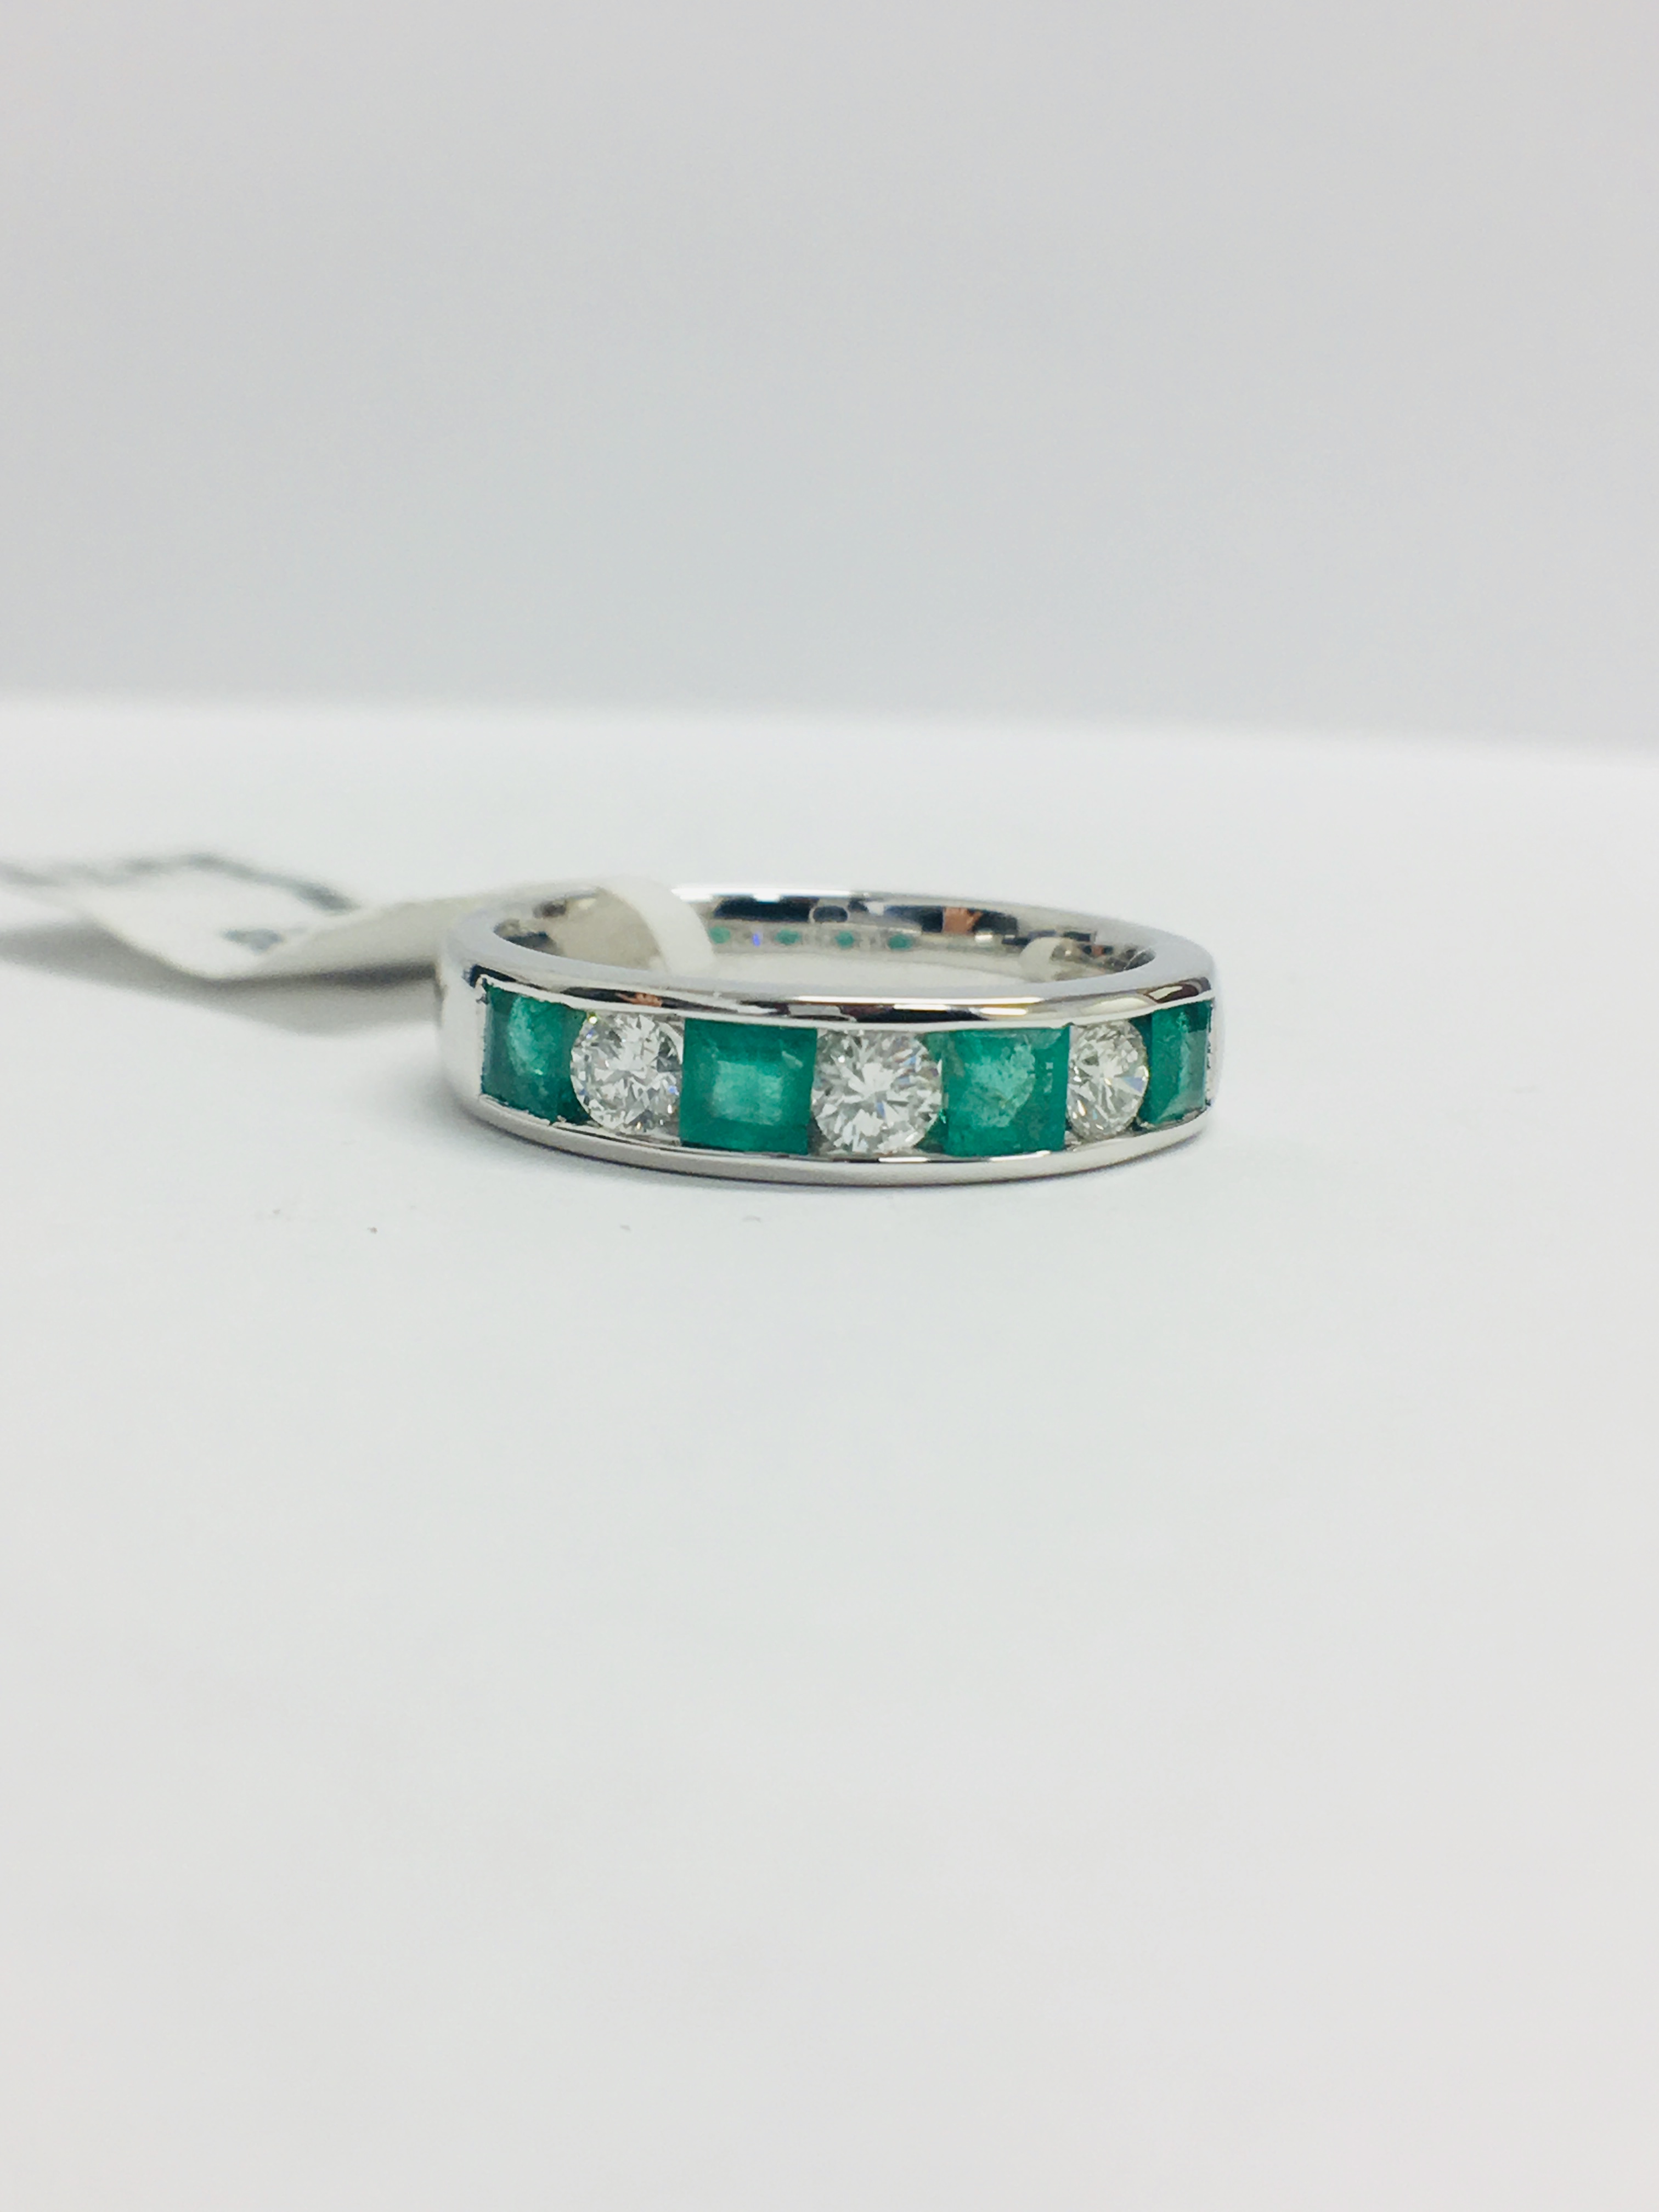 9Ct White Gold Emerald Diamond Channel Set Ring, - Image 11 of 13